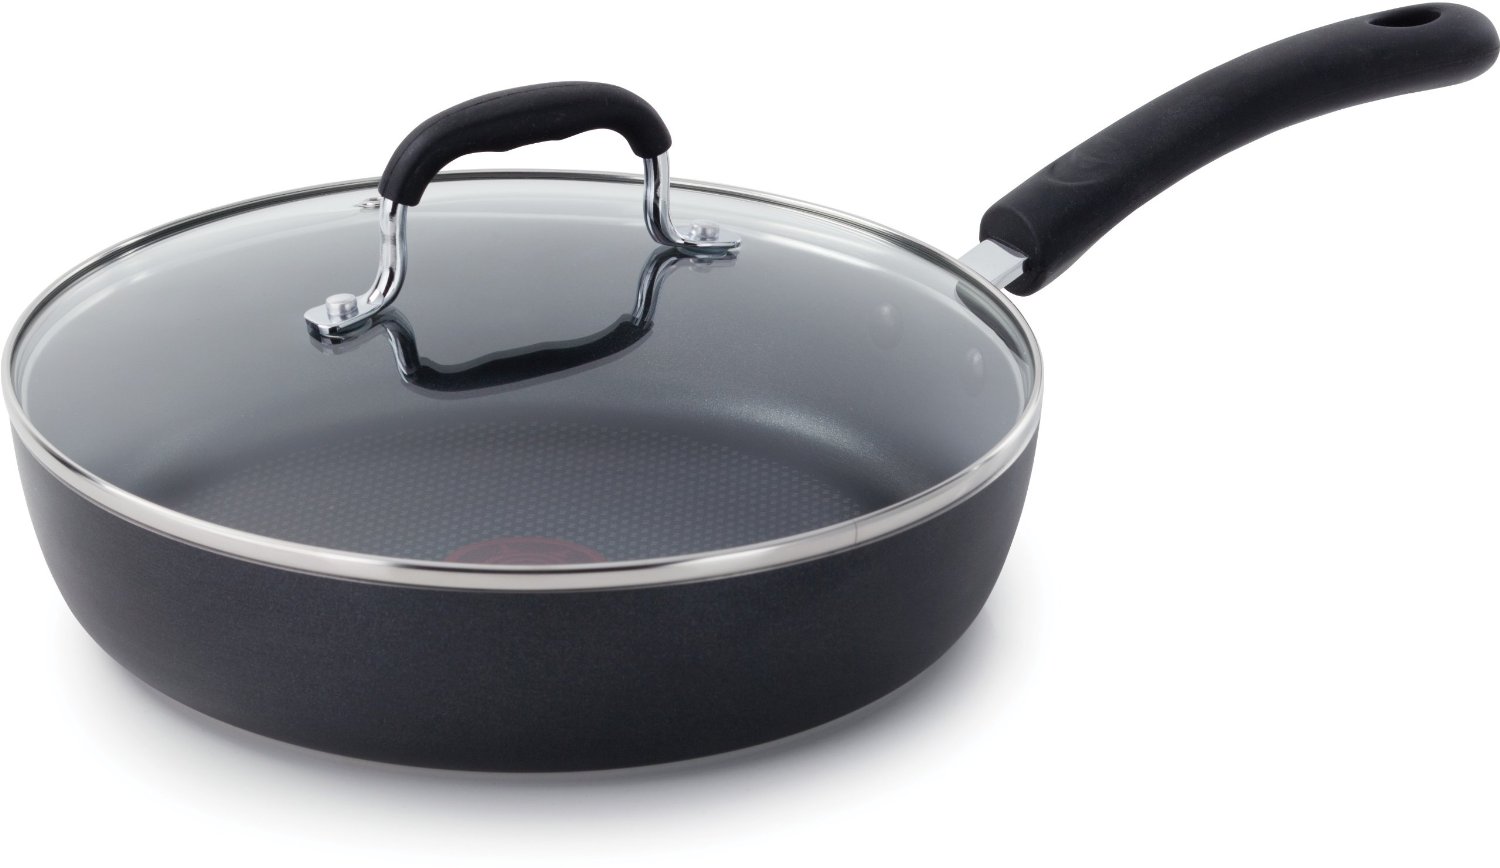 Professional Total Nonstick Thermo-Spot Heat Indicator Fry Pan 10.25'' Black